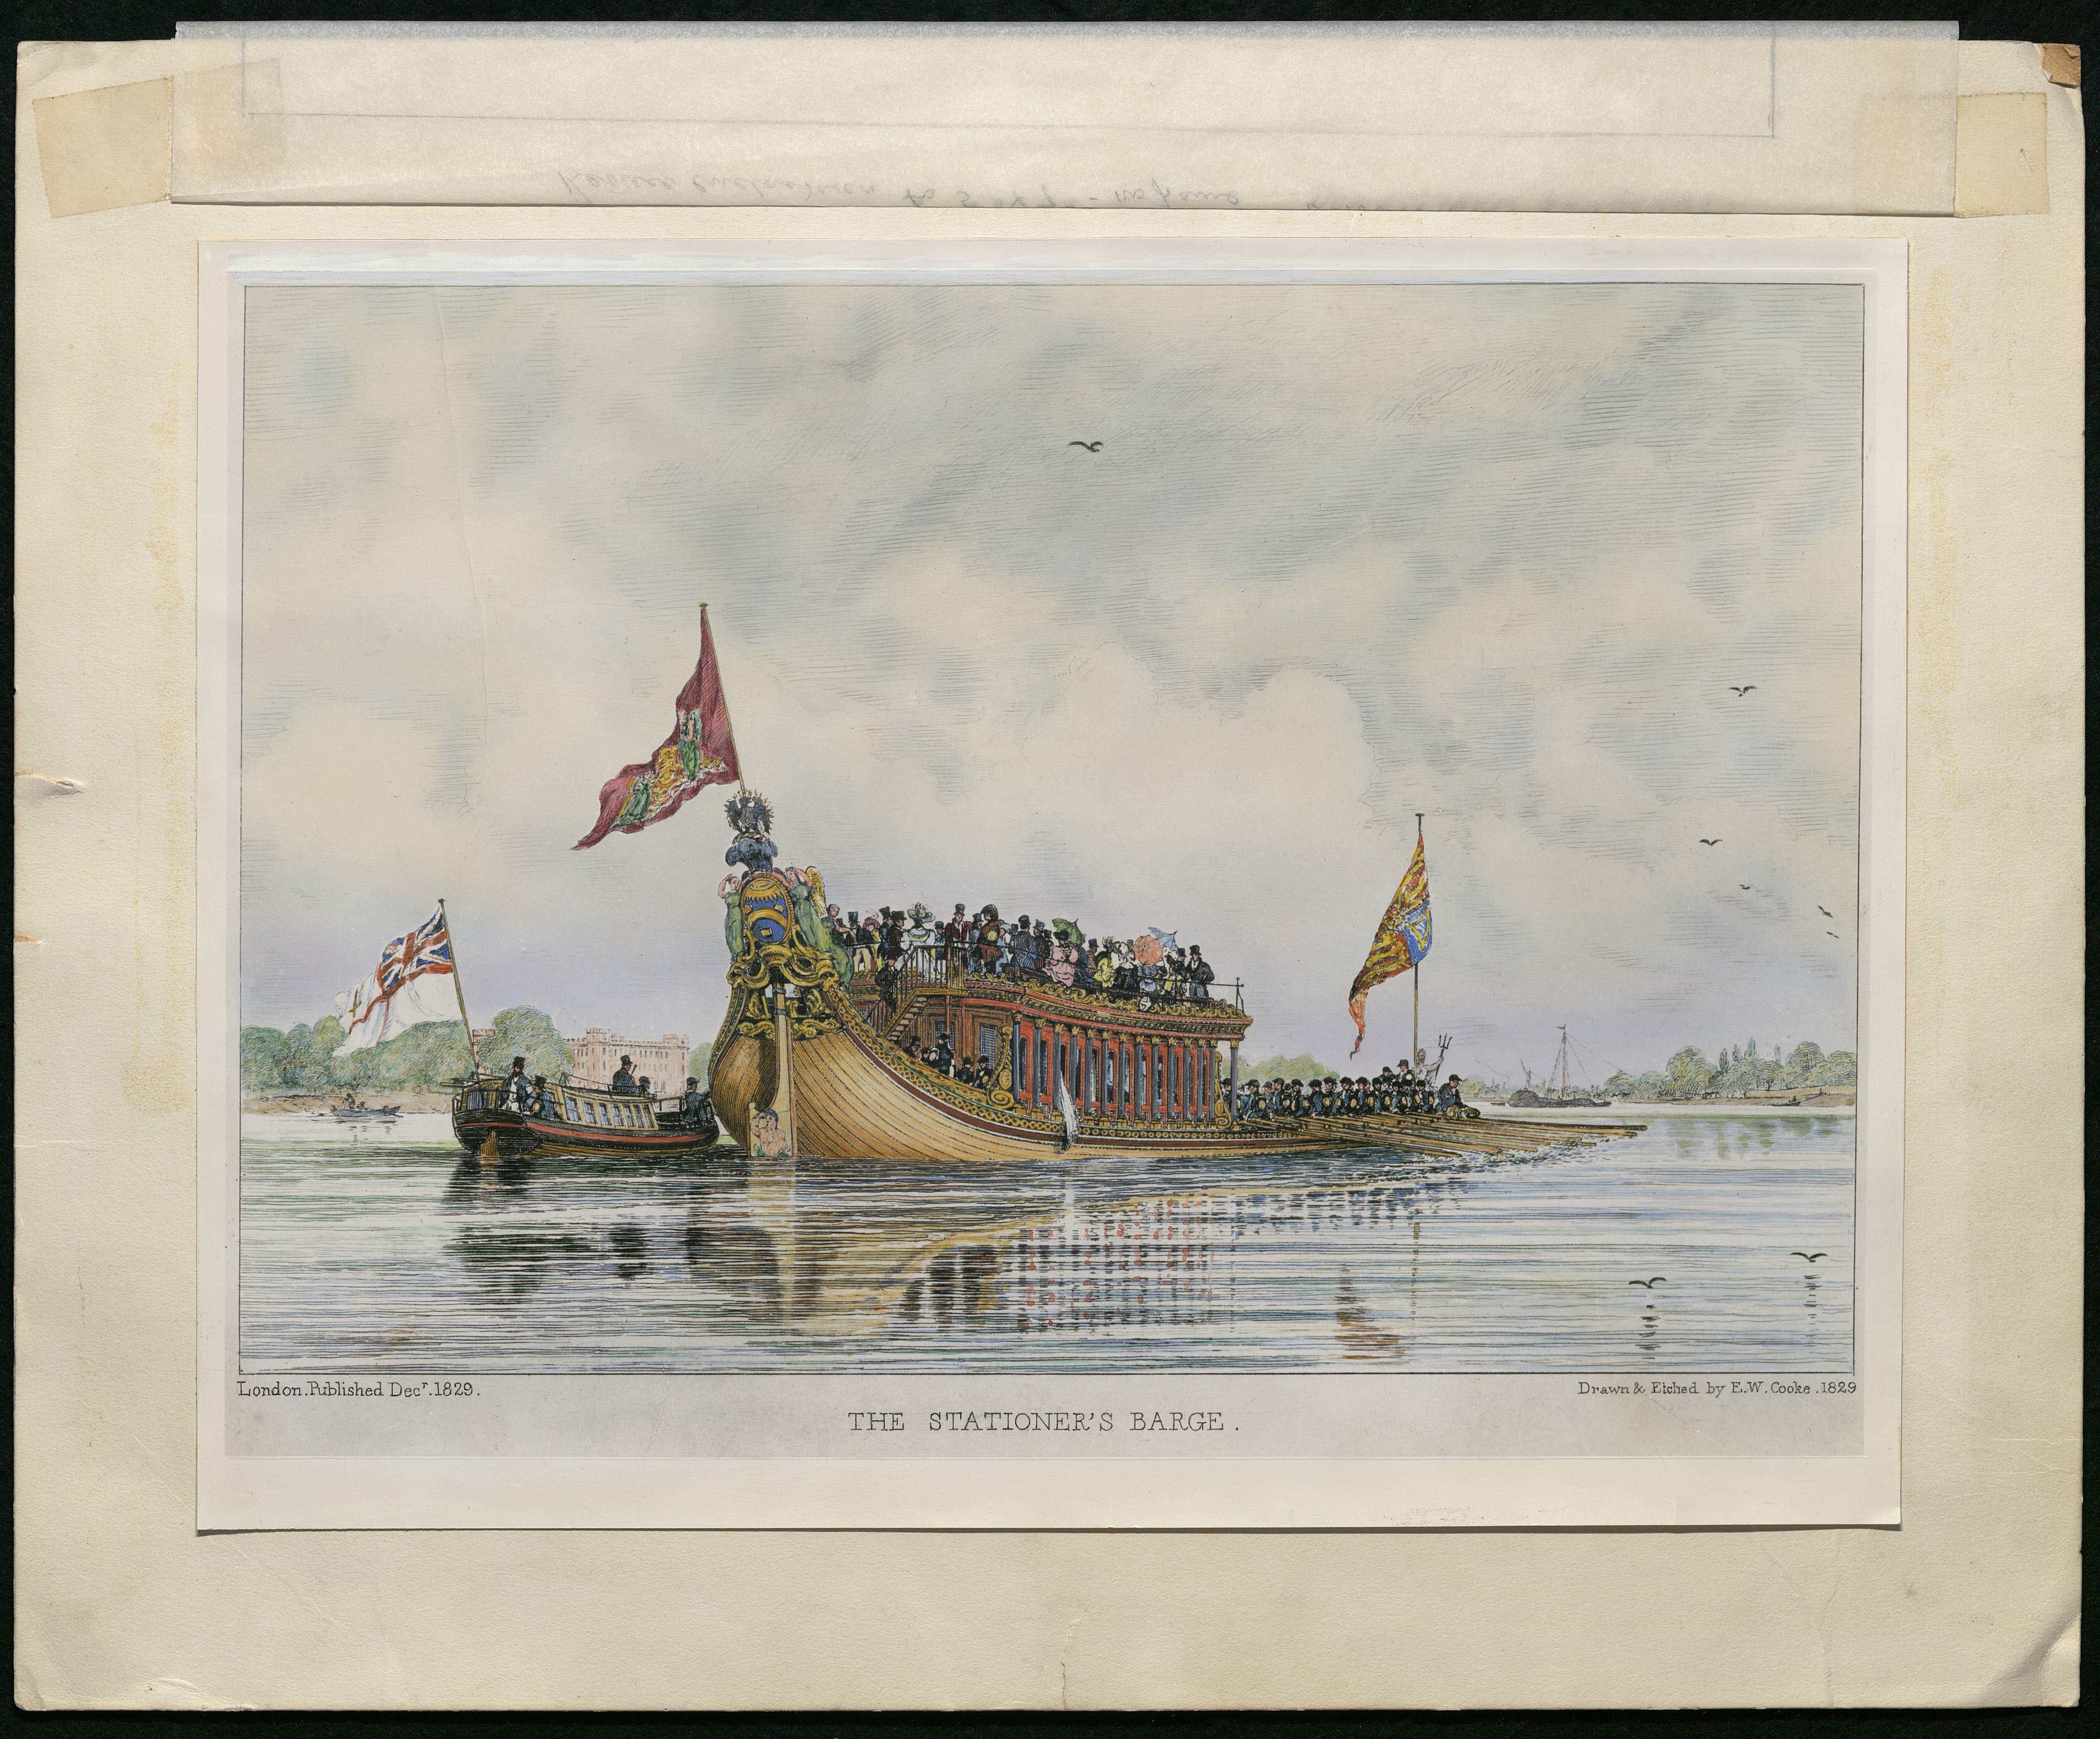 Watercolour of the Stationers' Company's barge.